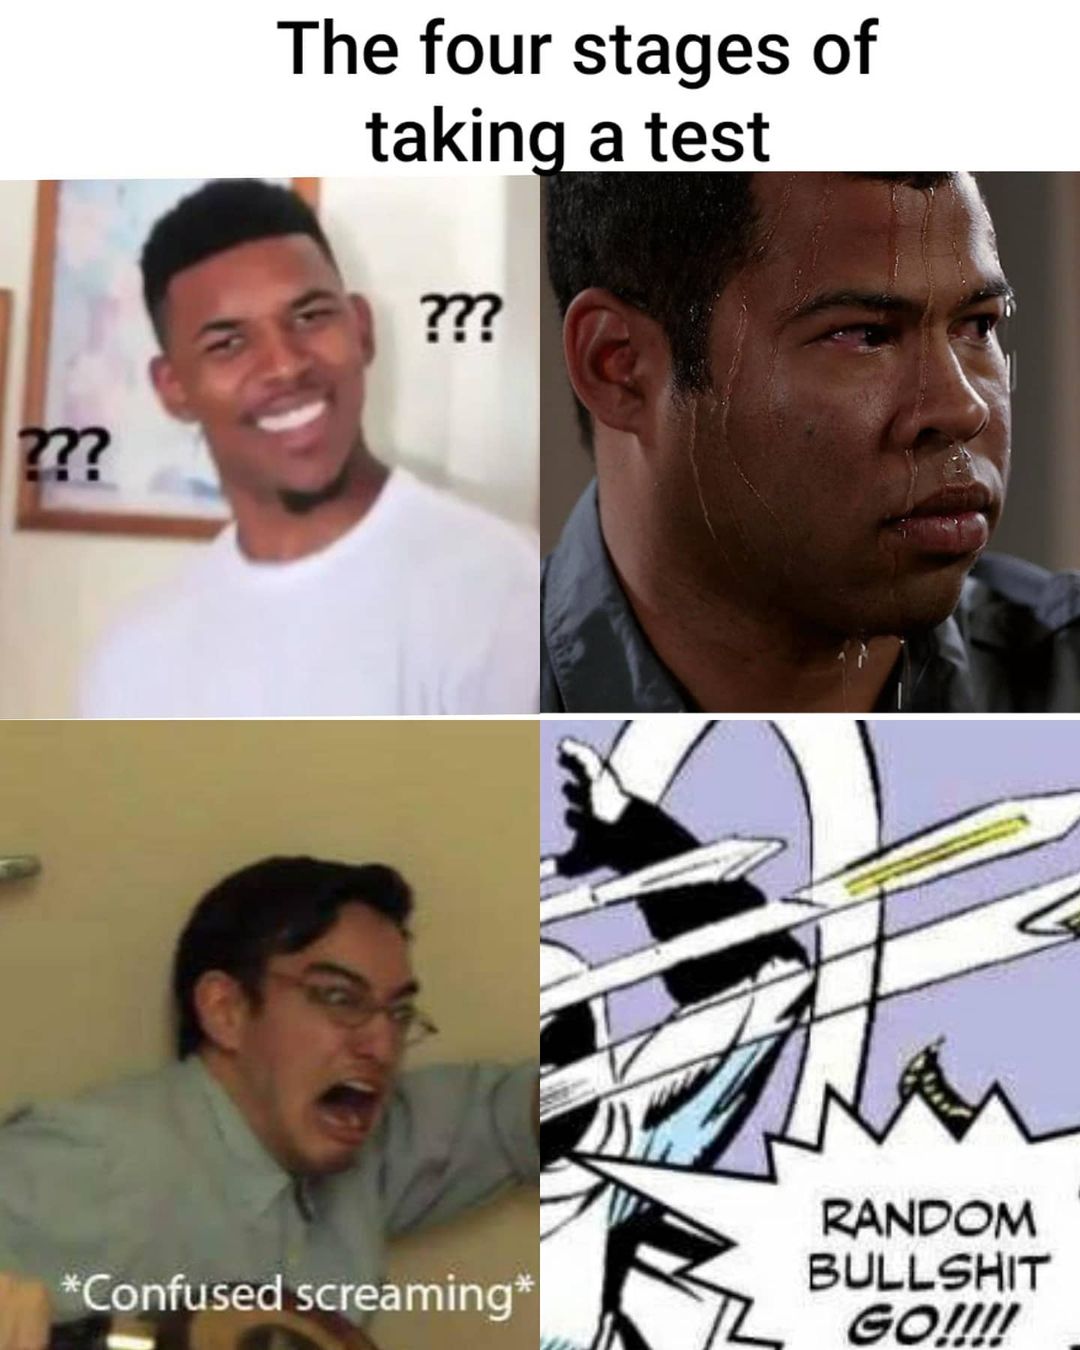 The four stages of takin a test.  *Confused screaming*  Random bullshit go!!!